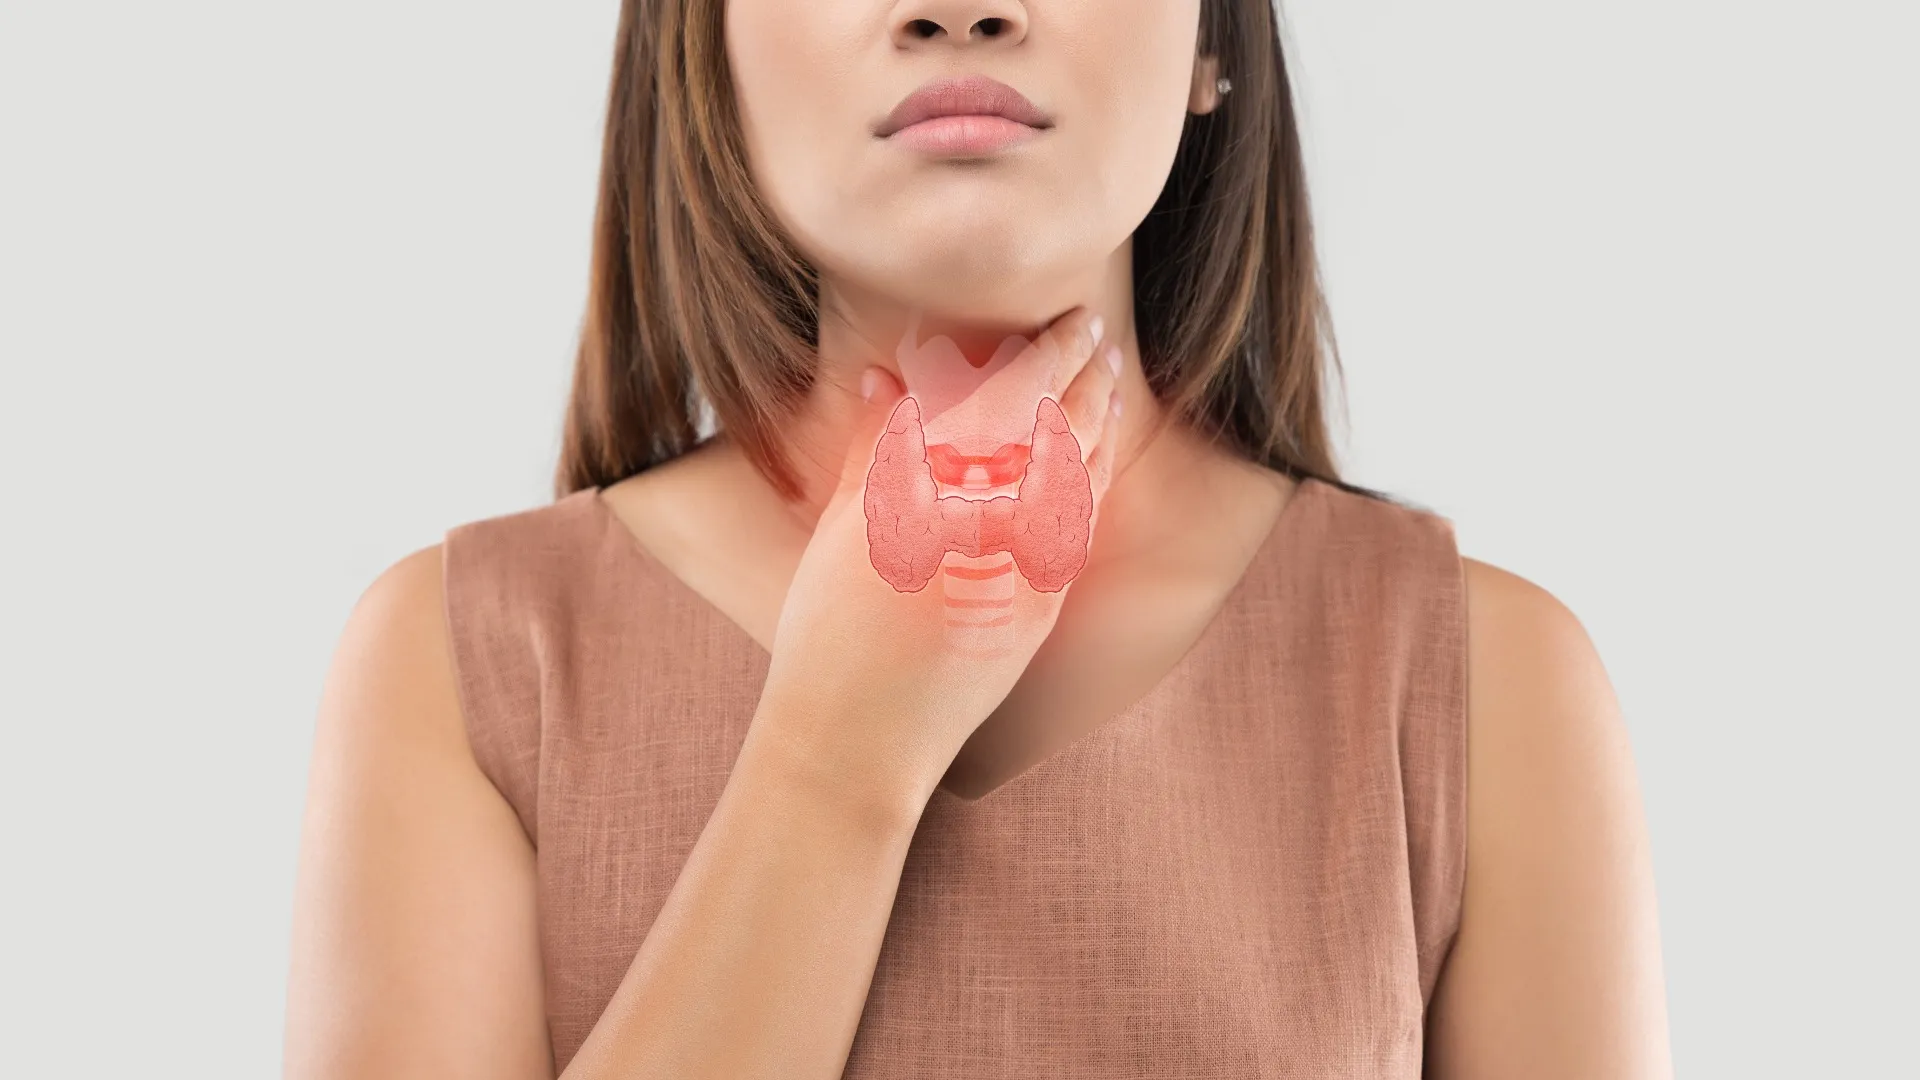 Thyroid Conditions: How Do You know if You’re Low or High, and What Can You Do?